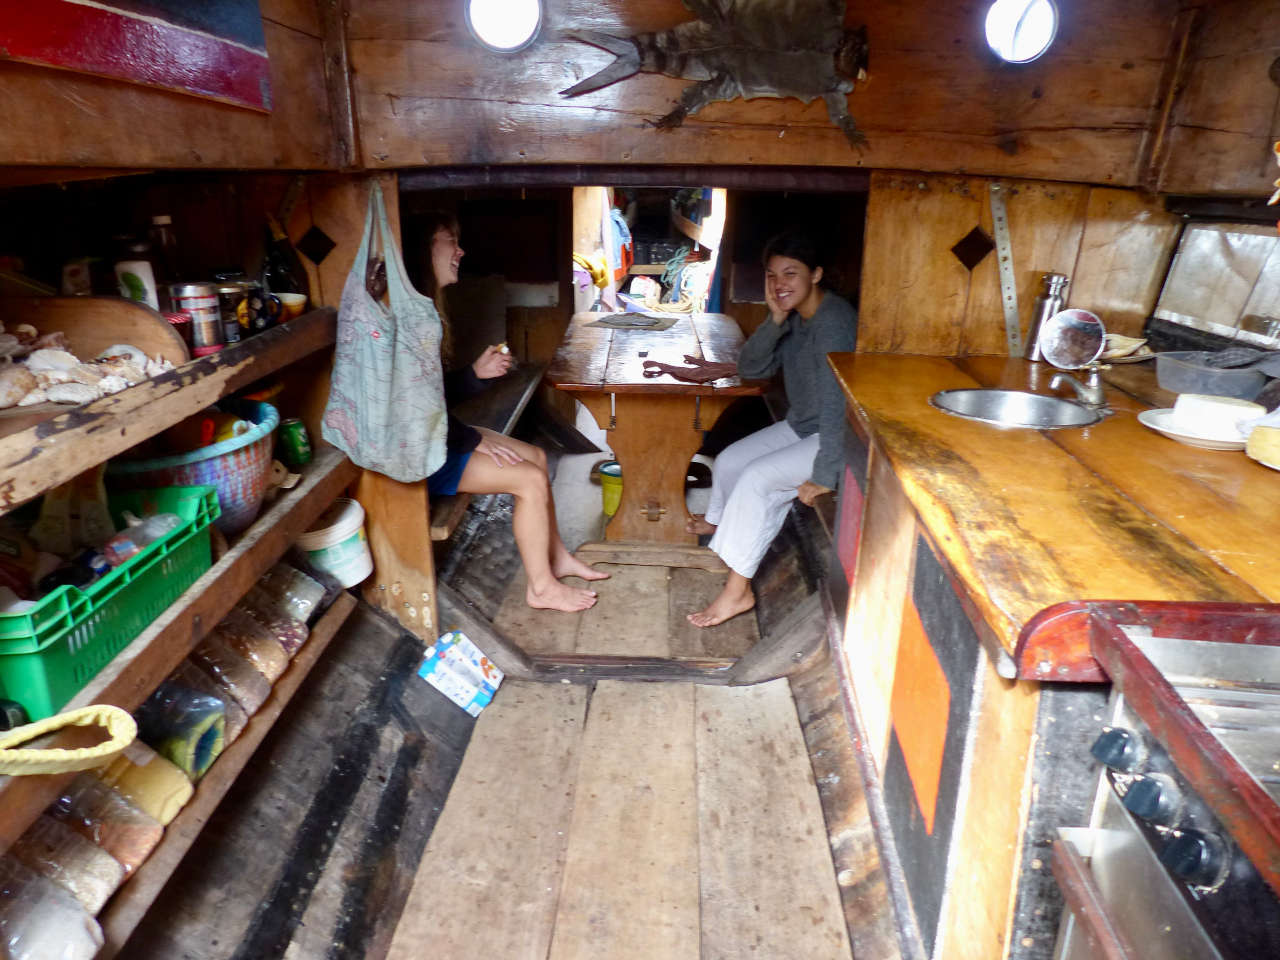 Two women sat at a galley table below decks